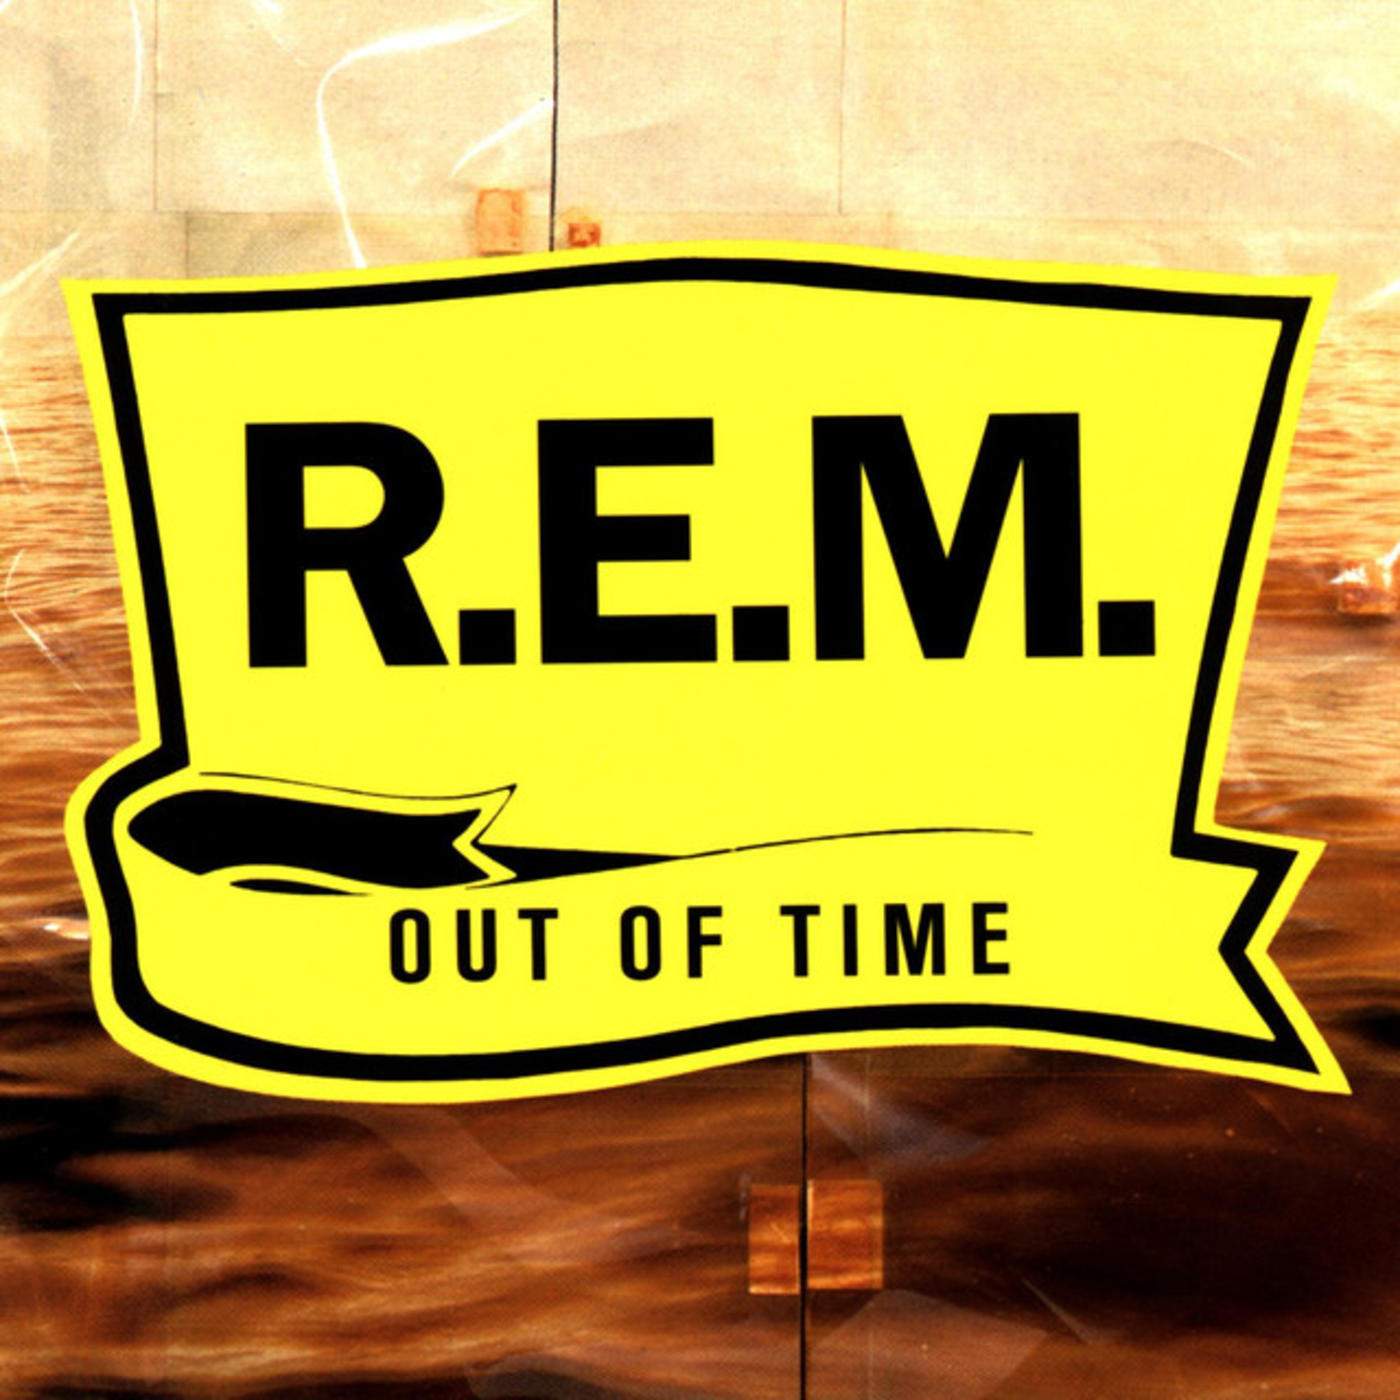 Out Of Time (U.S. Version)